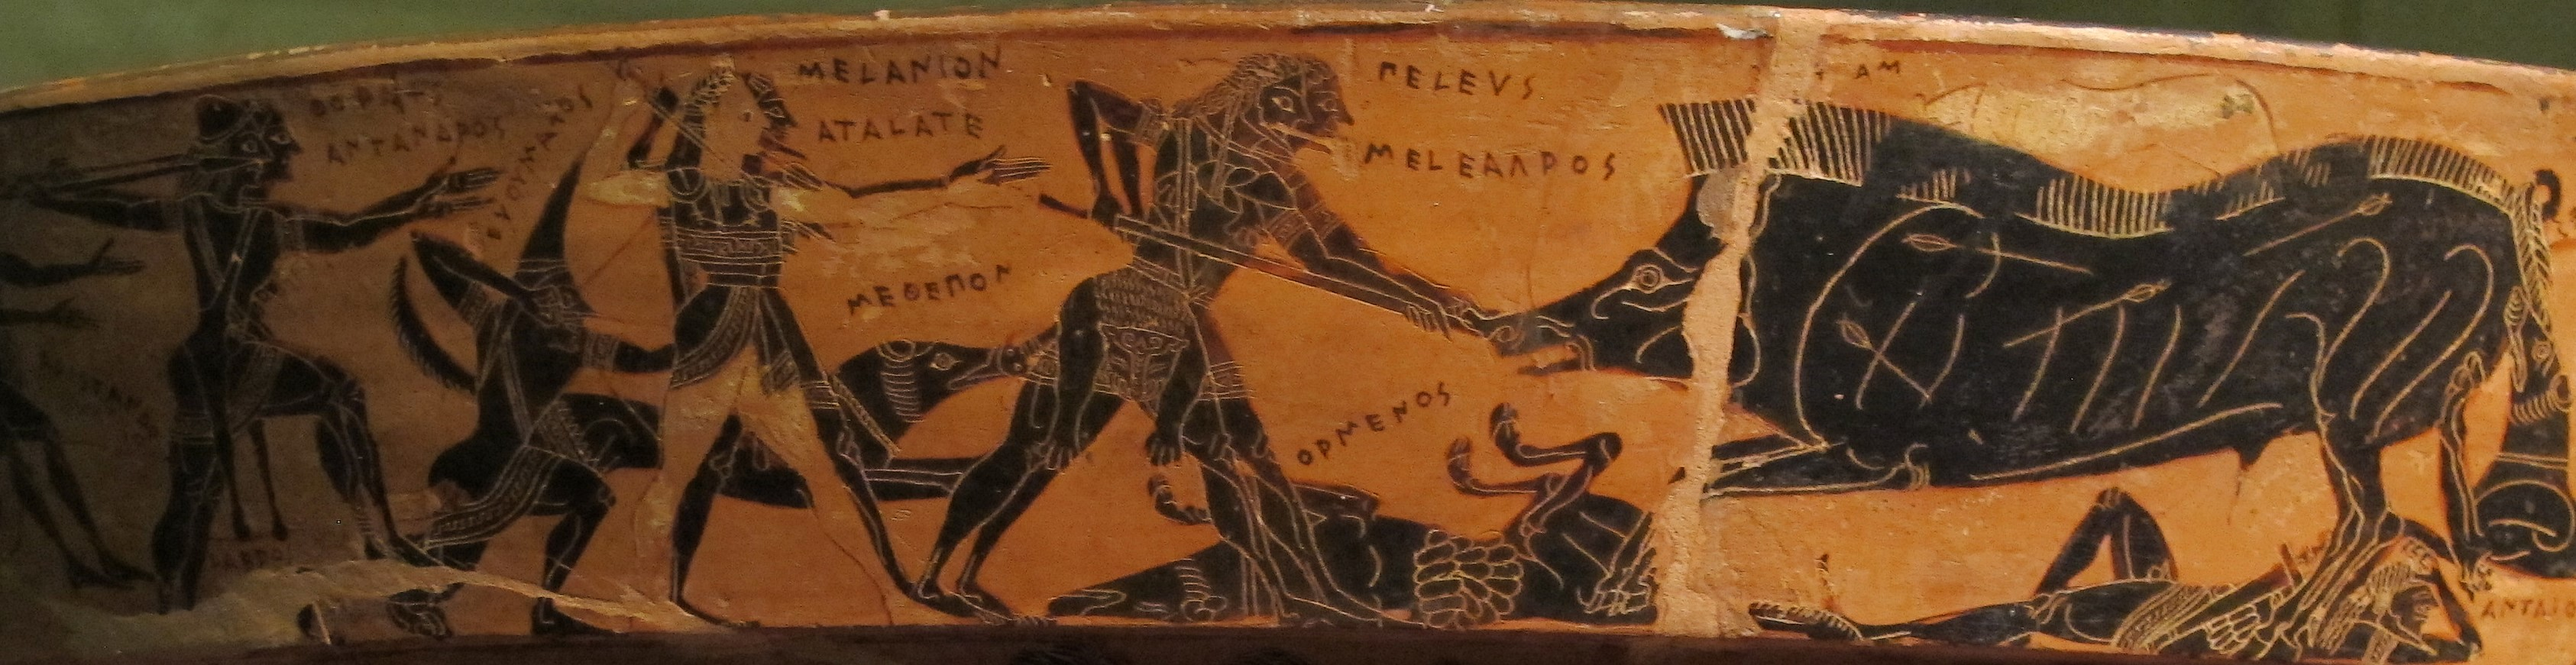 Heroes fighting the Calydonian boar, all labeled with names. Two stab at the boar with spears, and Atalanta stands behind a readies to throw a spear. Archers and a dog stand behind her. A dead dog and hero lie on the ground. Atalanta is depicted in white, while the male heroes are painted in black.